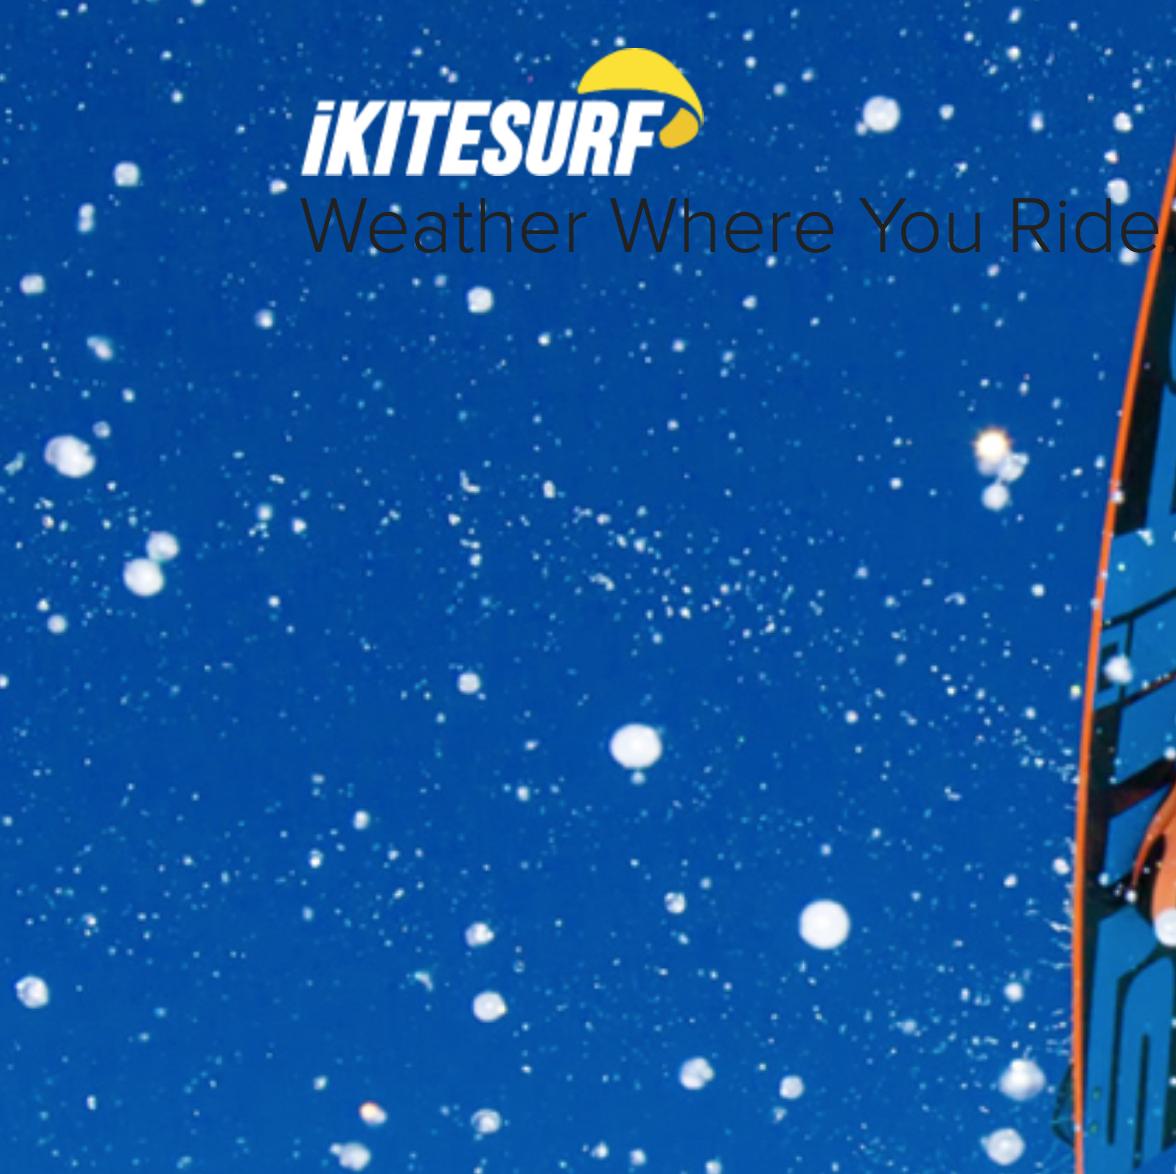 JOB OPENING AT iKITESURF! We are expanding our PRO Forecast team. Can you write a wicked forecast? Let us know. INFO: weatherflow.com/jobs/